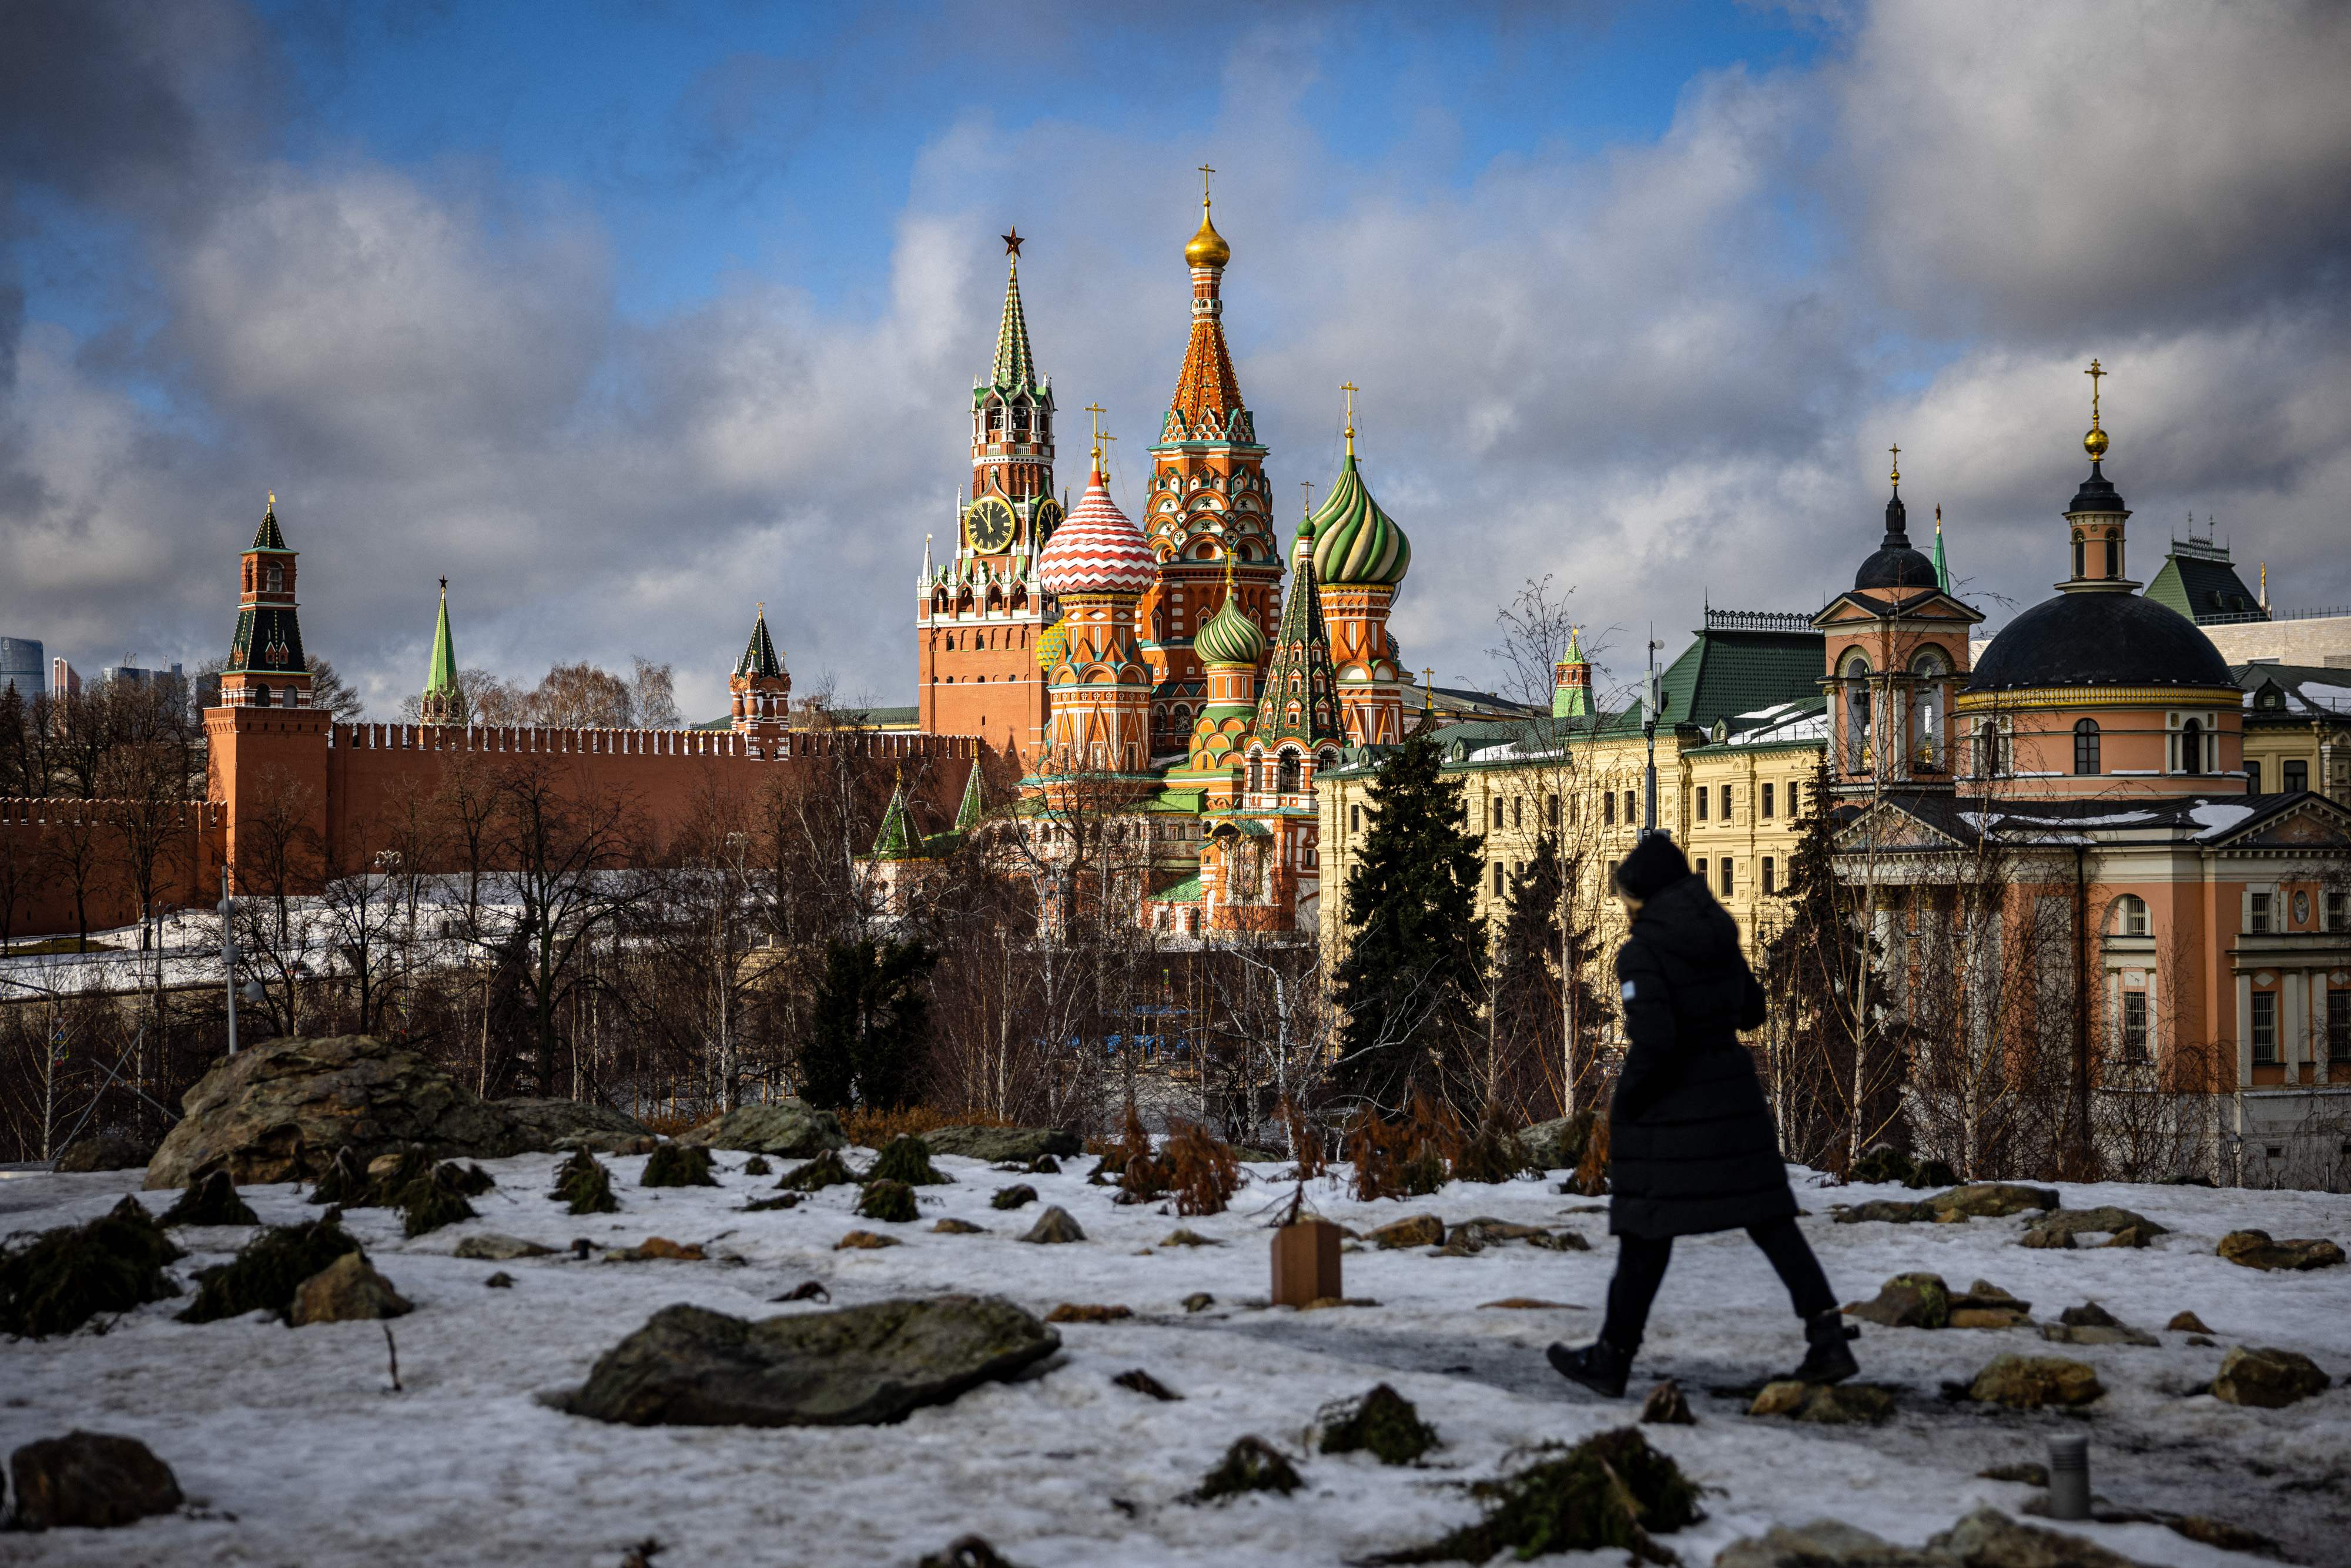 The distinctive onion domes of St Basil’s Cathedral in Moscow